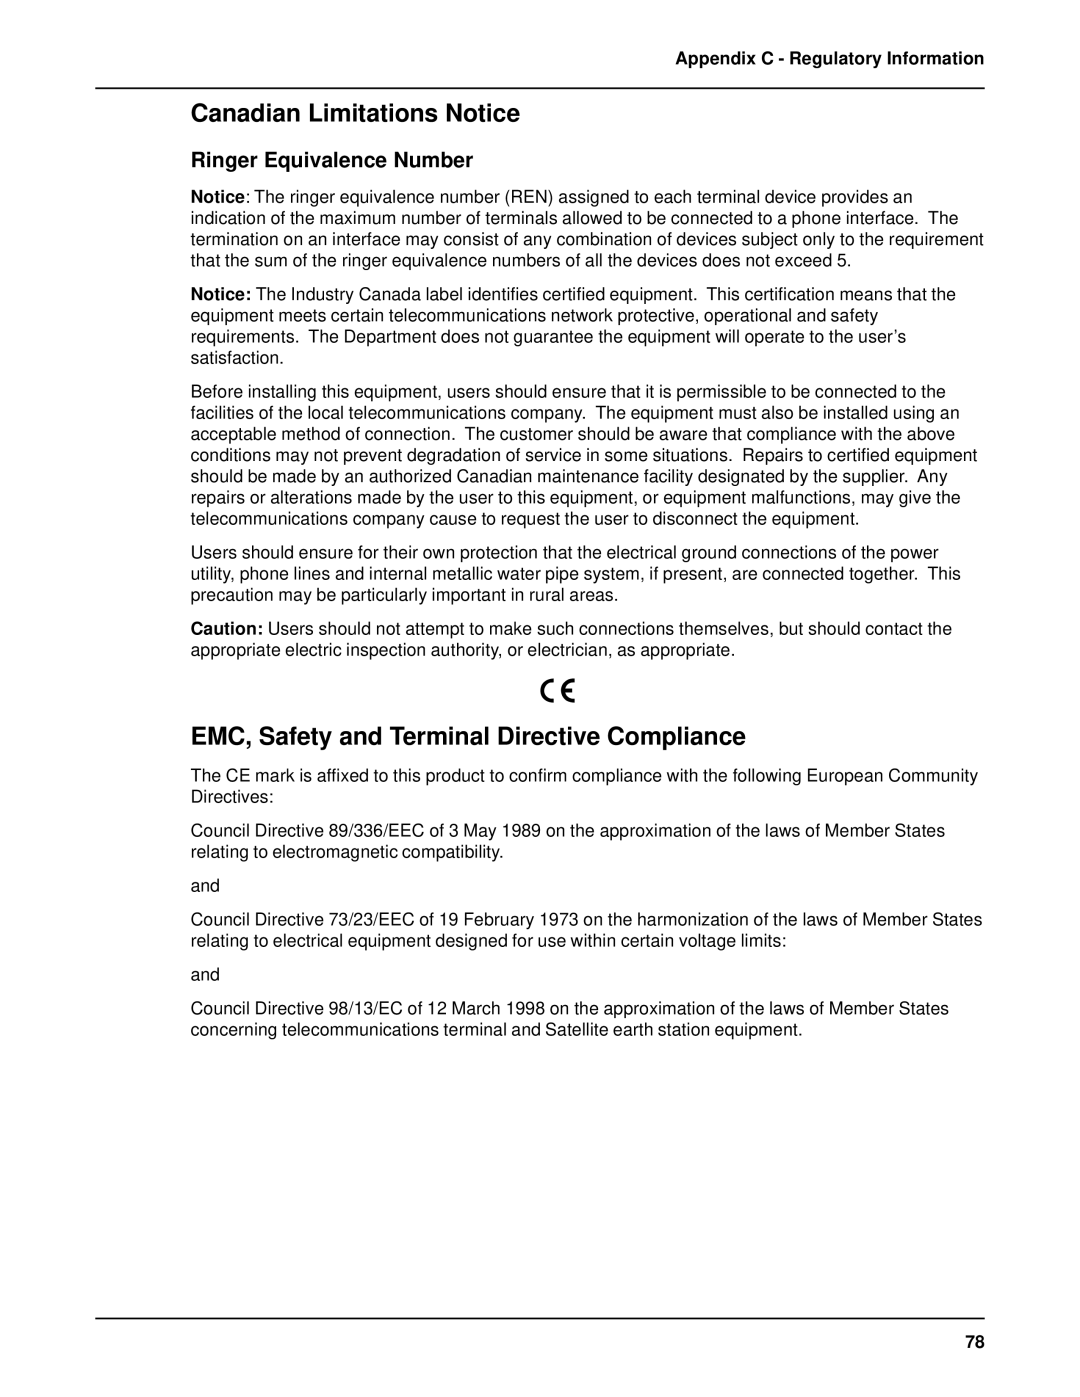 Multi-Tech Systems MVP 800 manual Canadian Limitations Notice, EMC, Safety and Terminal Directive Compliance 